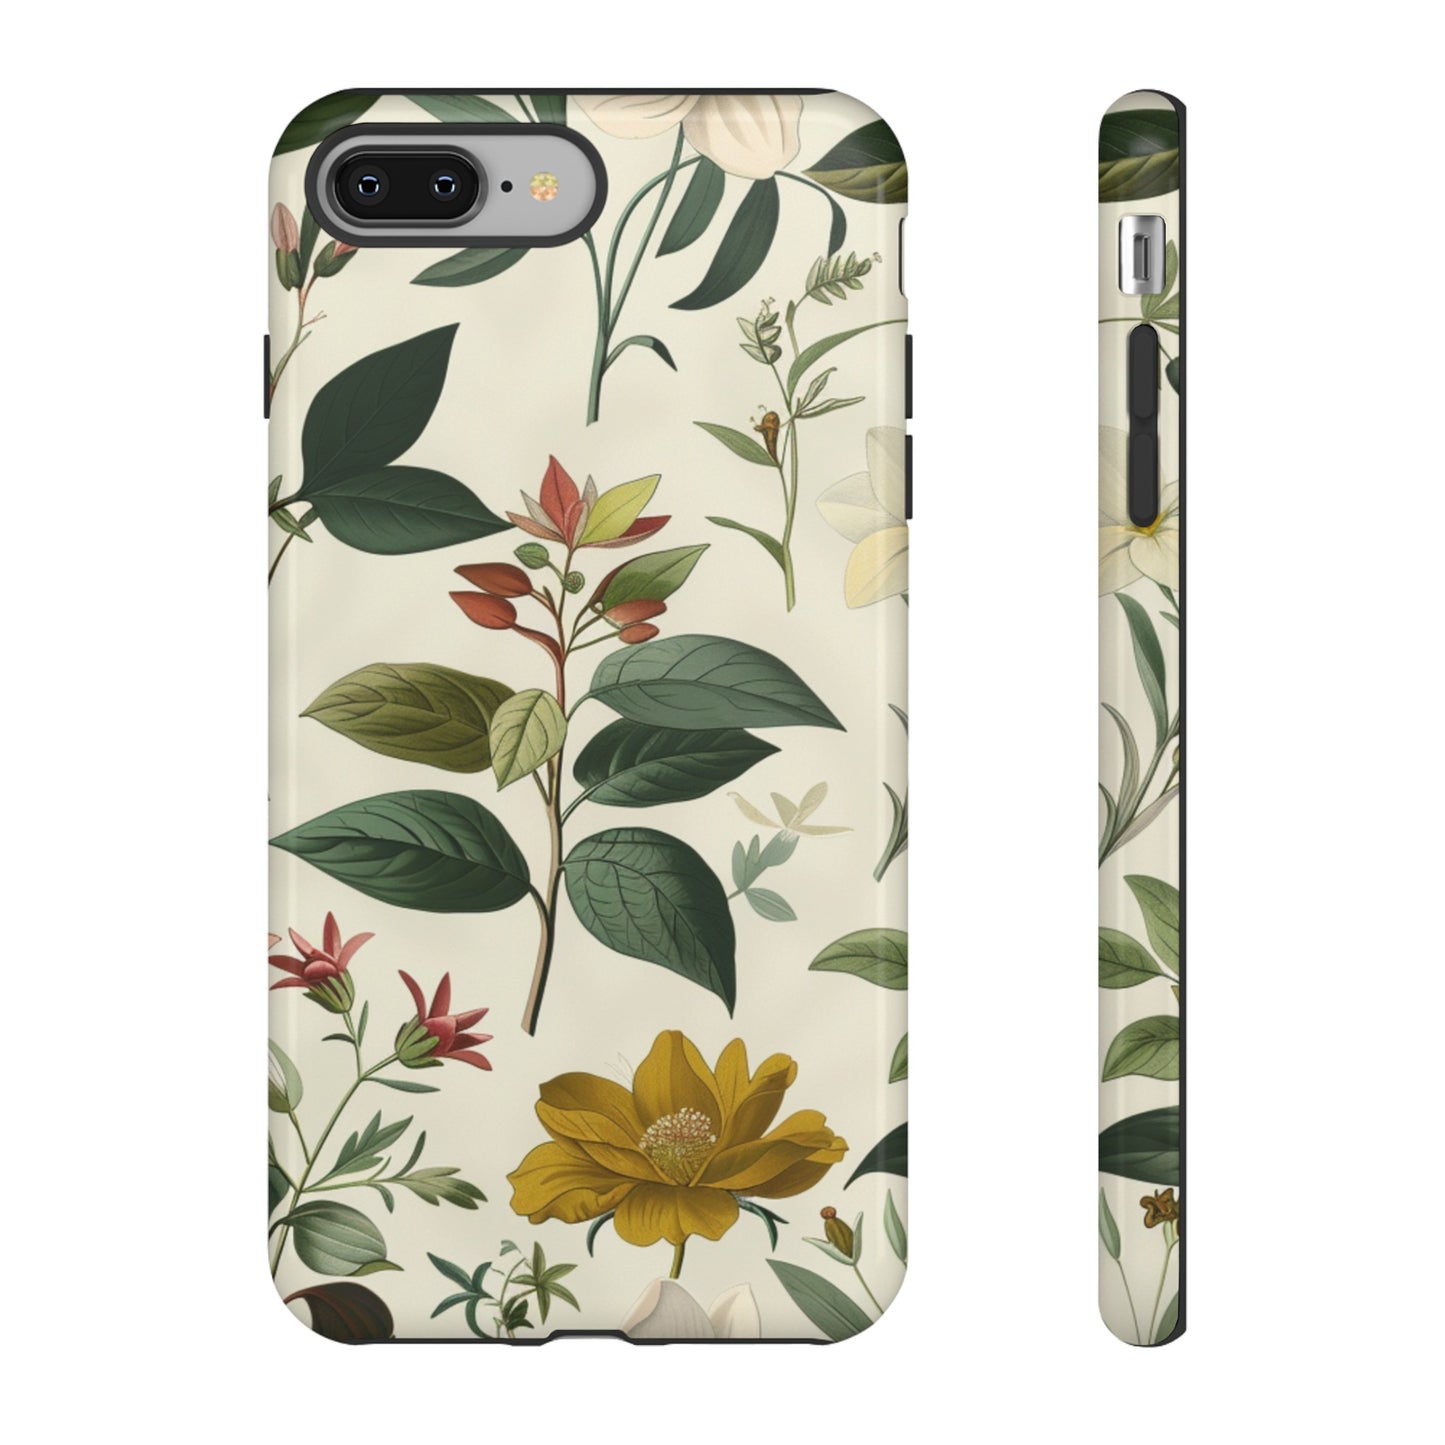 An elegant featuring a vintage botanical illustration in muted tones-